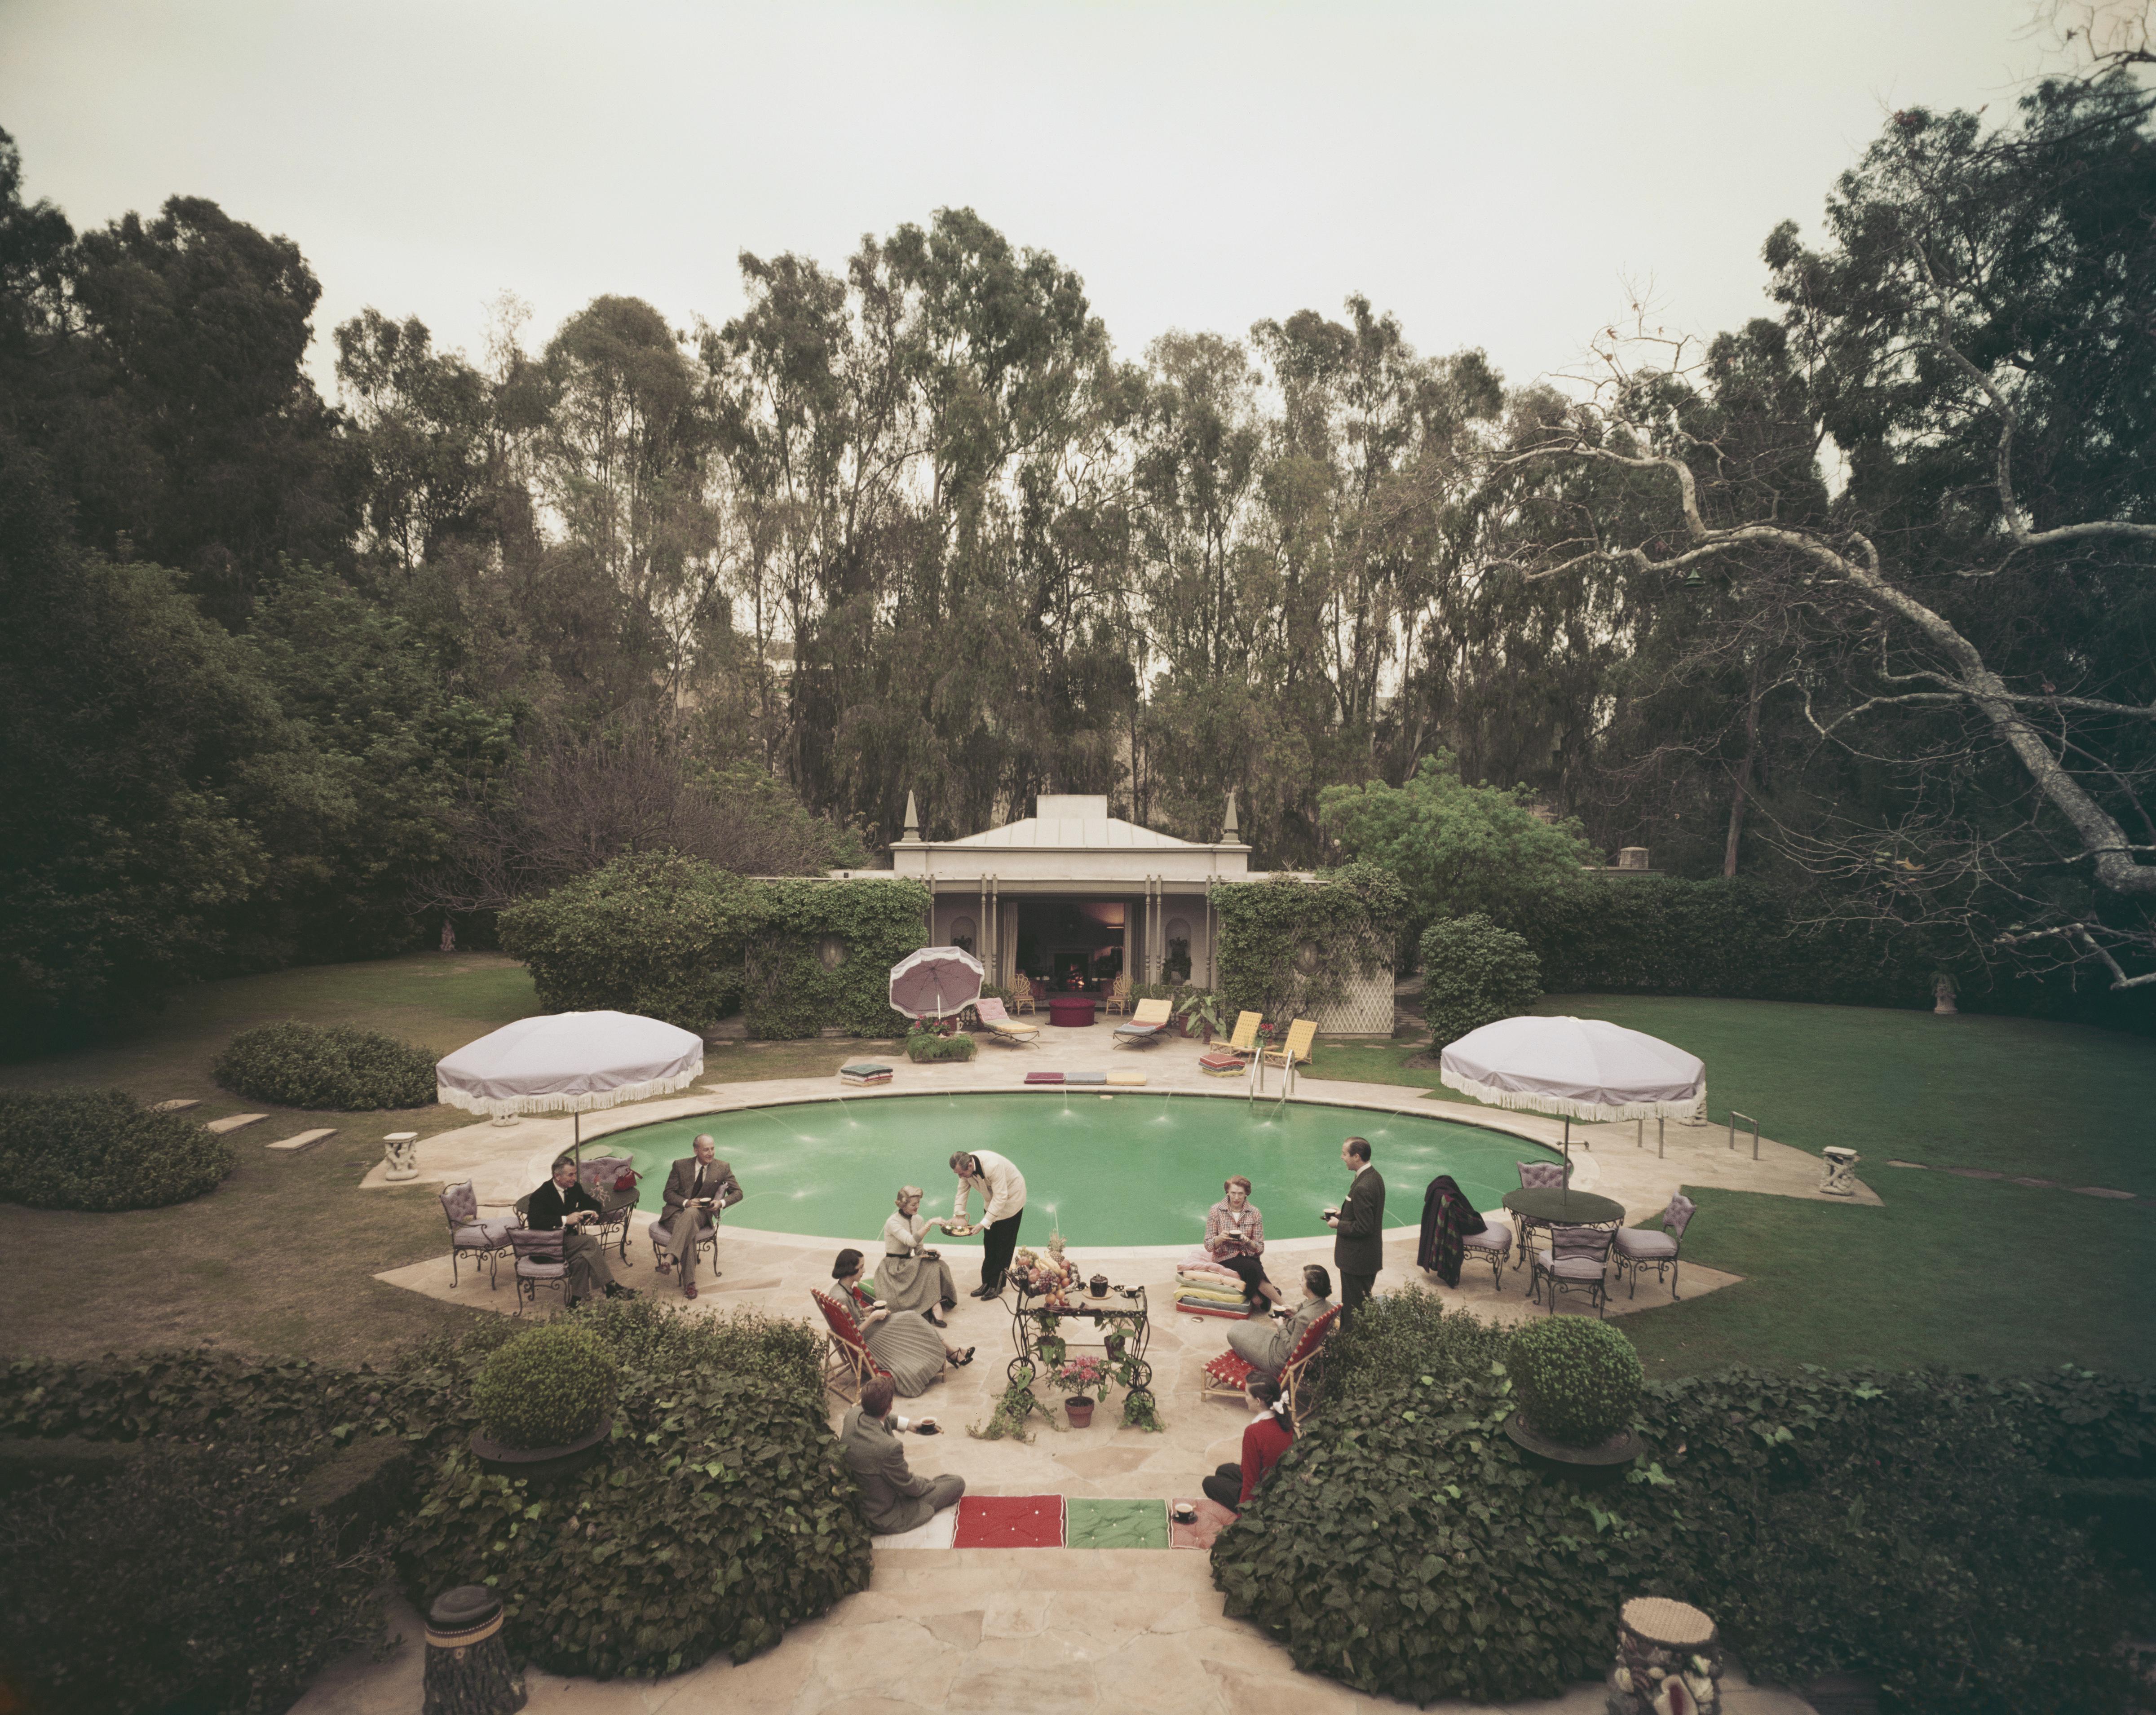 'Scone Madam' 1960 Slim Aarons Limited Estate Edition

1960: Afternoon tea round the pool on a cool day at the home of interior decorator James Pendleton in Beverly Hills. A Wonderful Time – Slim Aarons.

Produced from the original